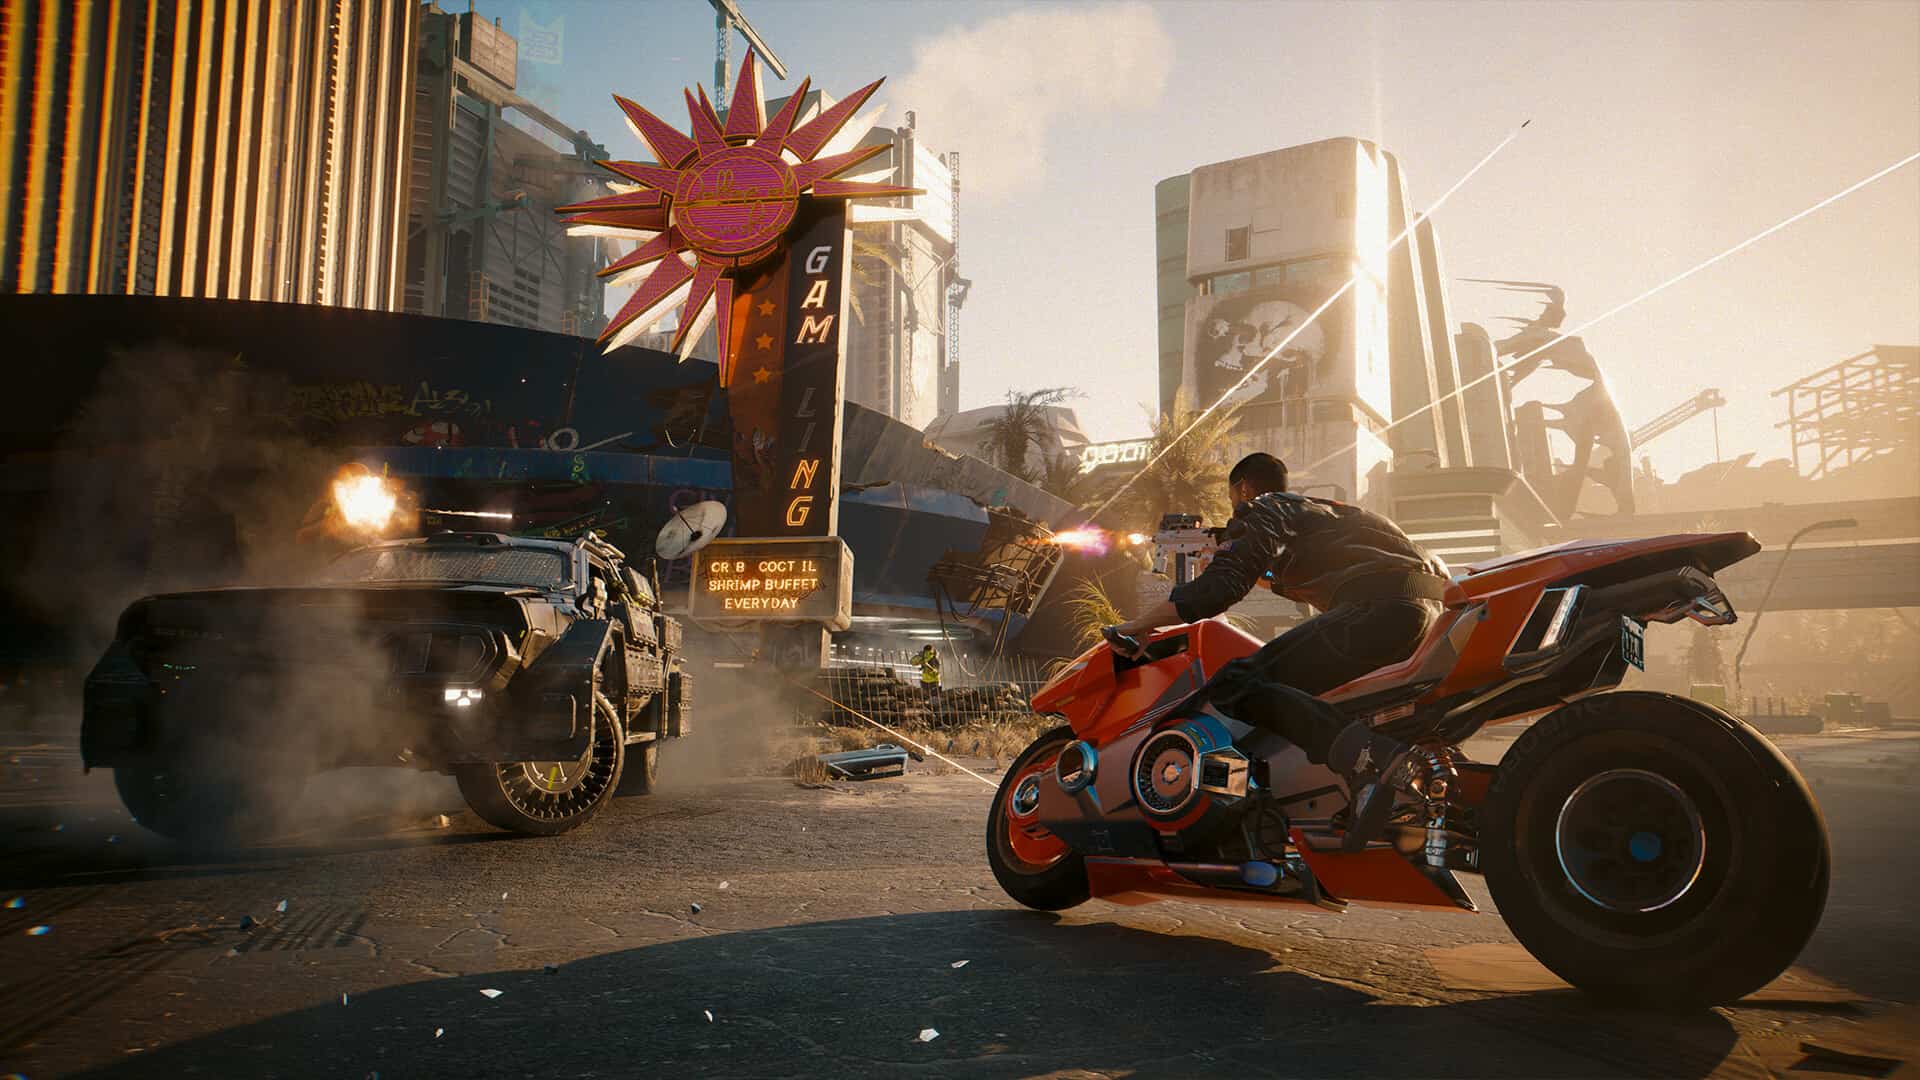 A man riding a futuristic motorcycle on a city street in the Cyberpunk 2077 sequel.